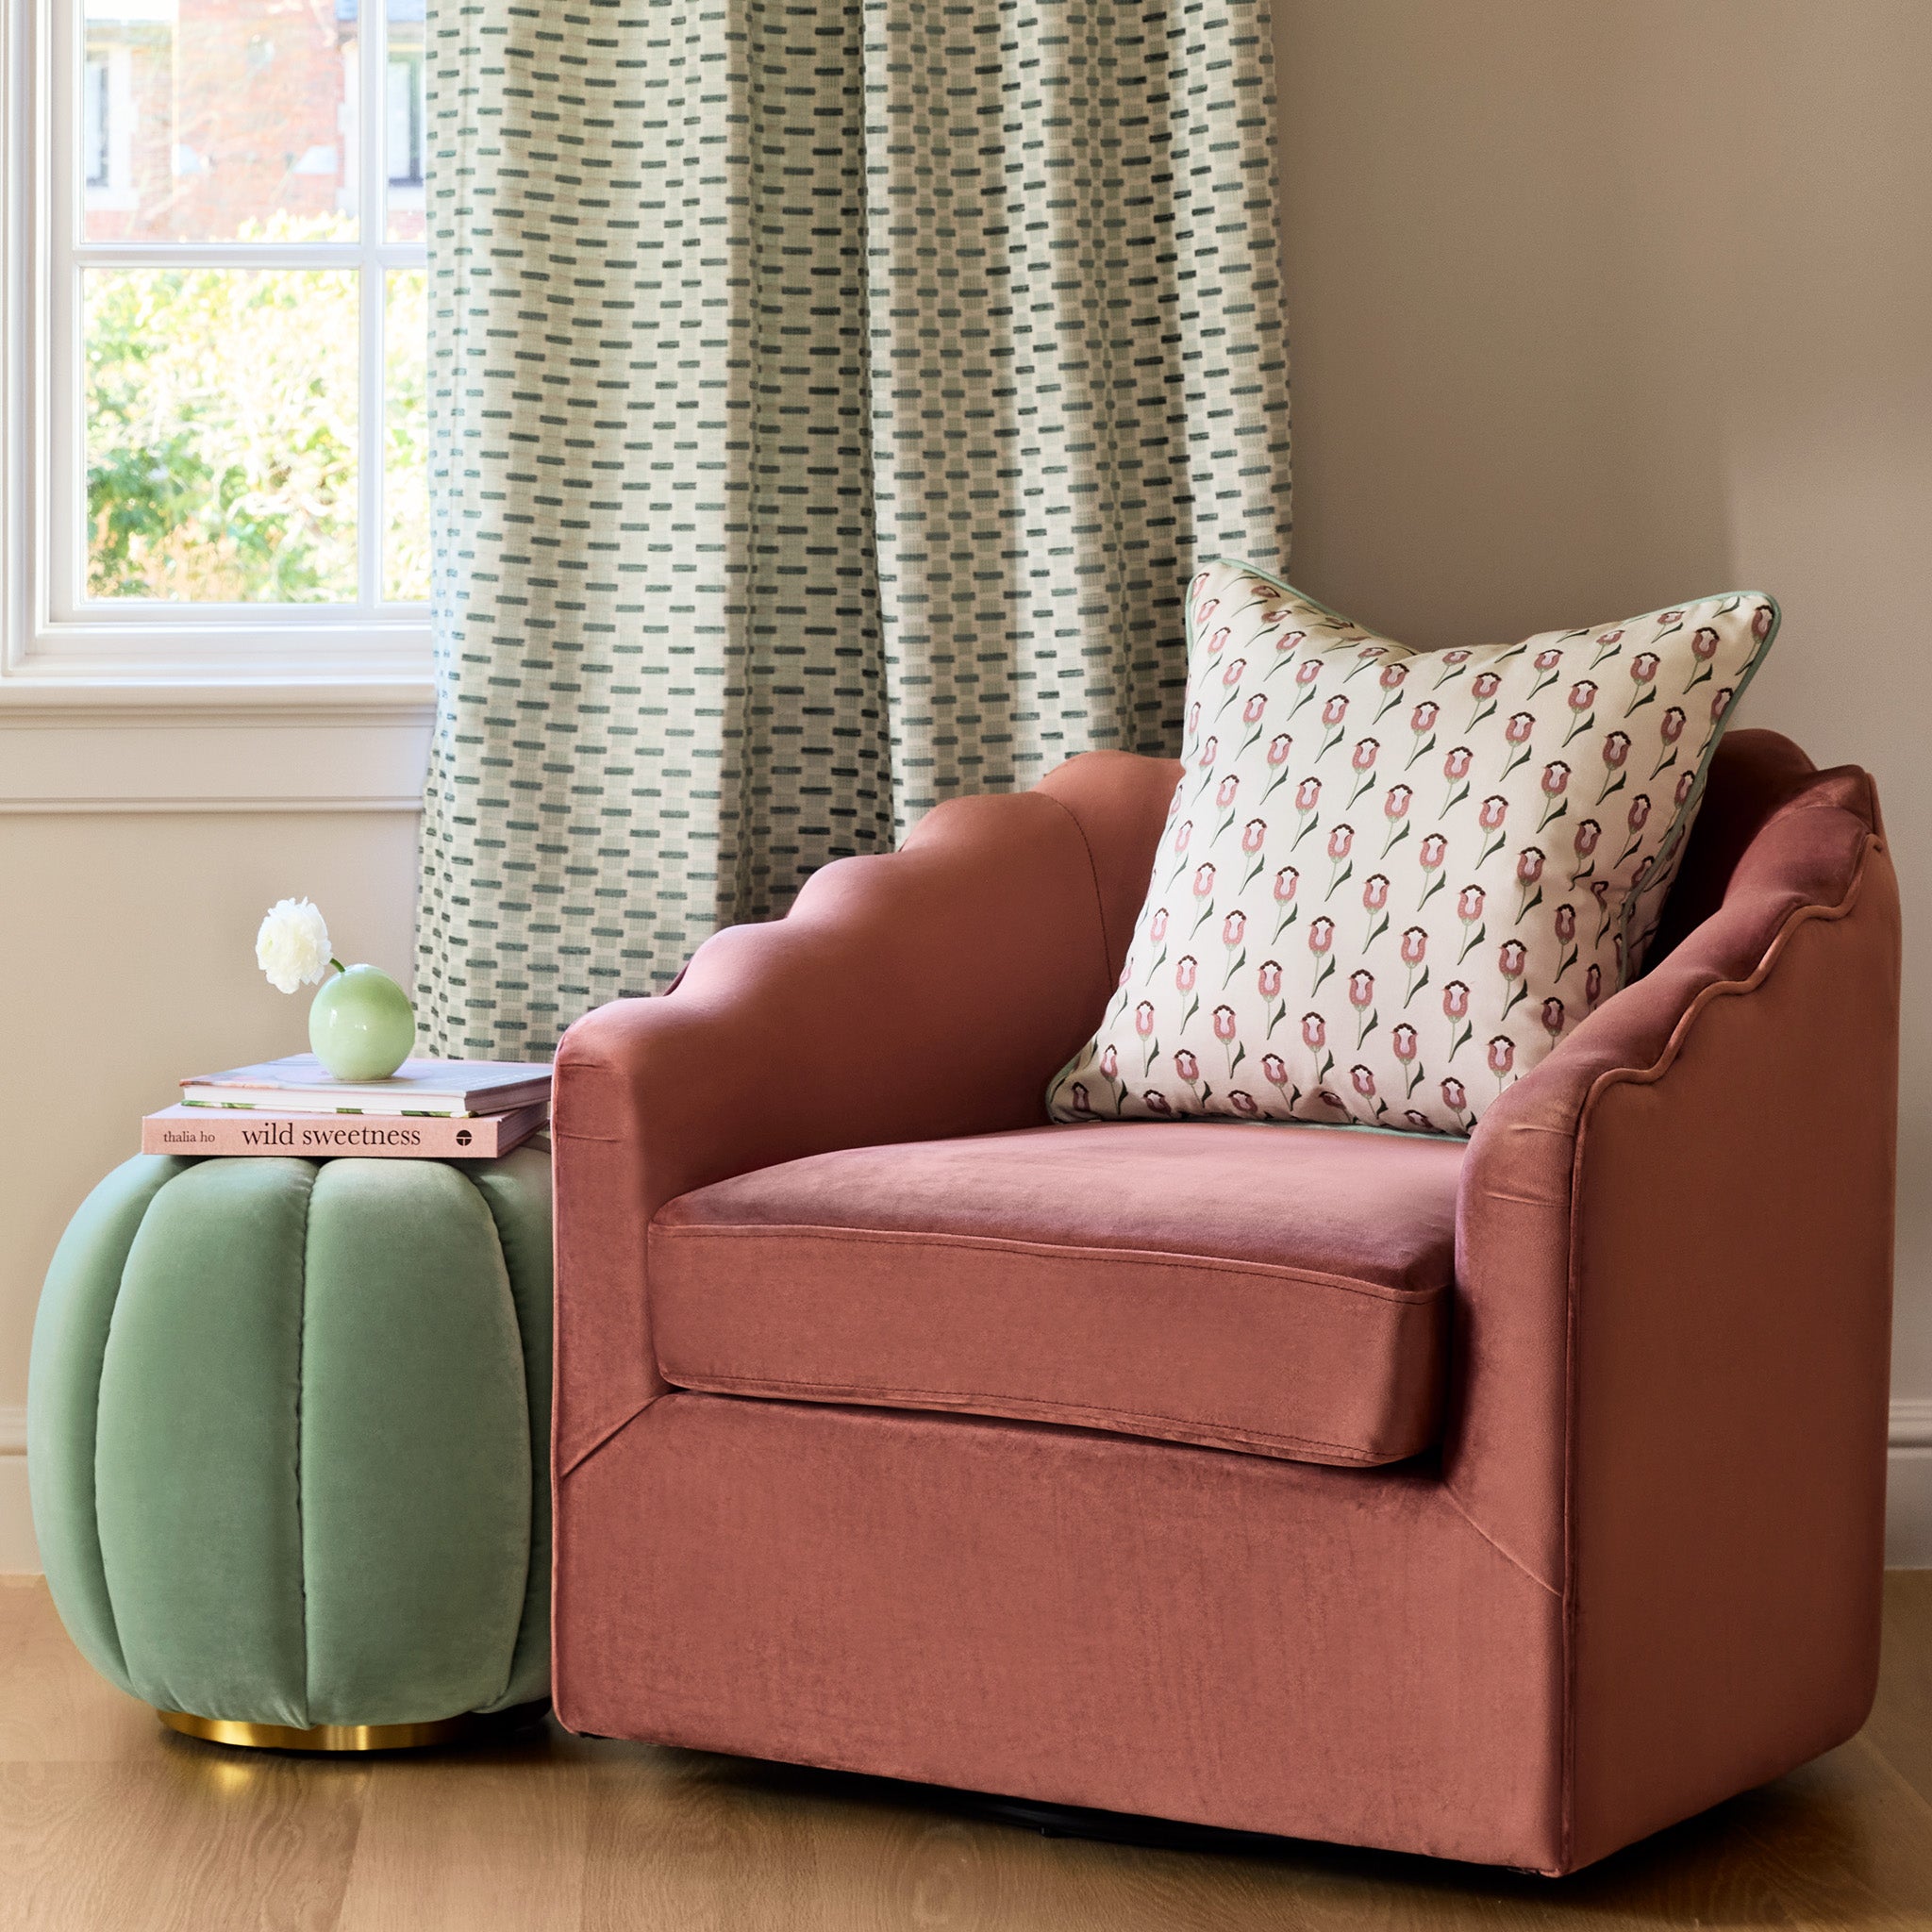 chenille and woven jacquard mint green geometric curtains in front of a window with a rust colored chair in front with a floral pillow